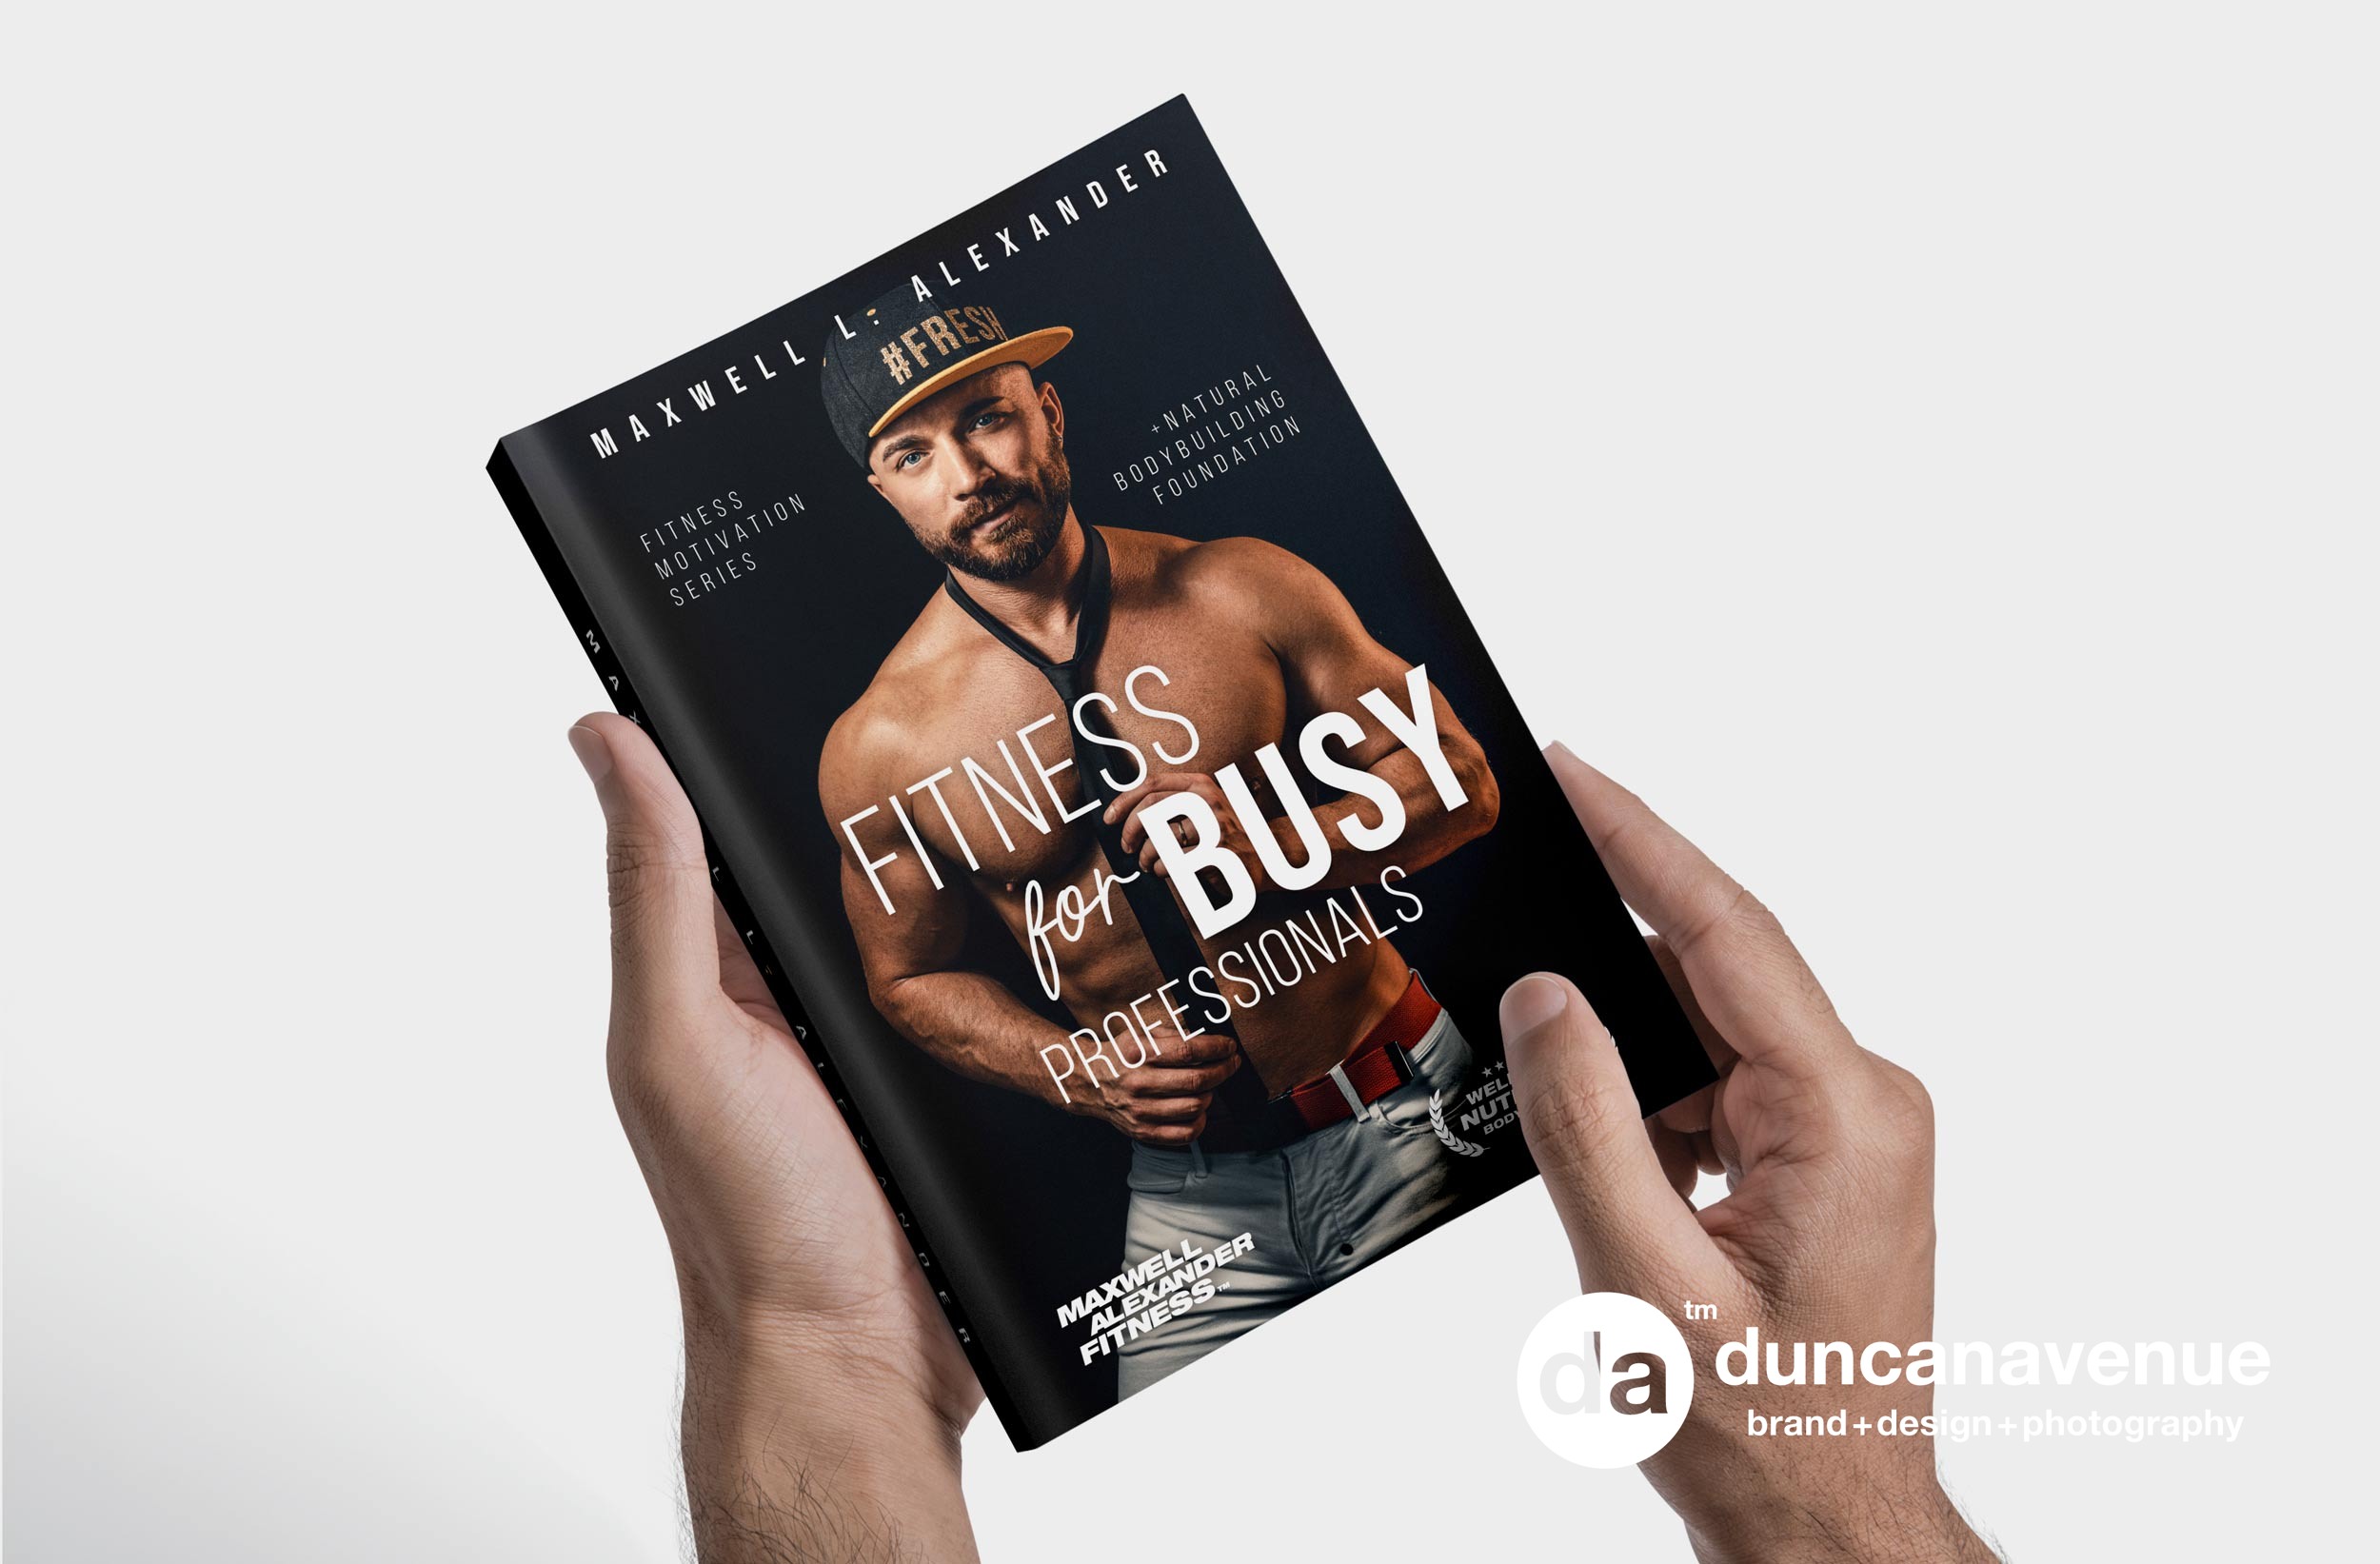 Fitness for Busy Professionals – New Fitness Motivation Book by Maxwell Alexander